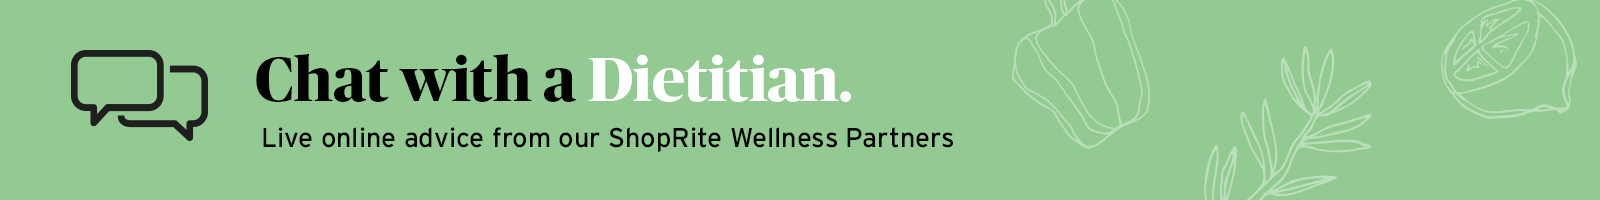 Chat with Wellness Partner